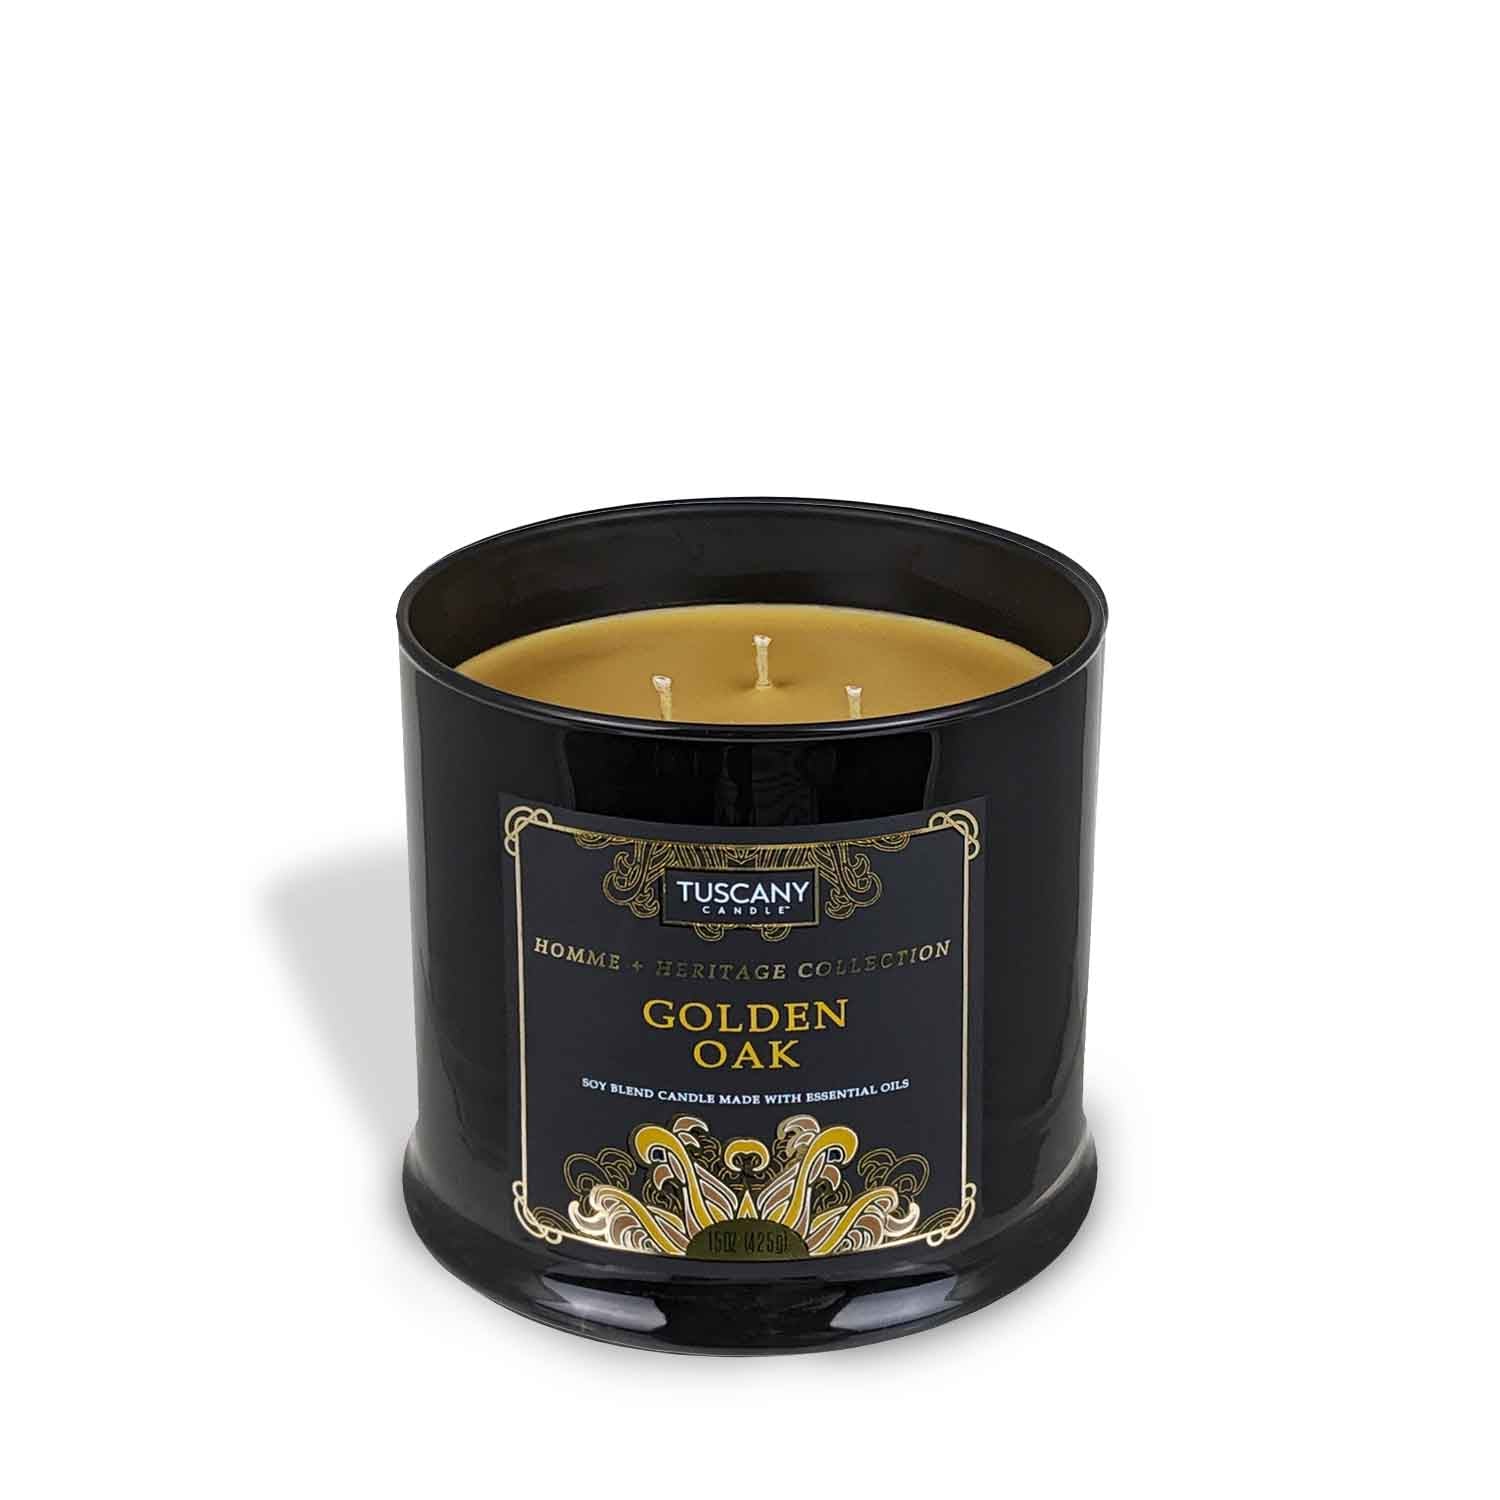 Golden Oak scented candle in a black tin - Tuscany Candle.